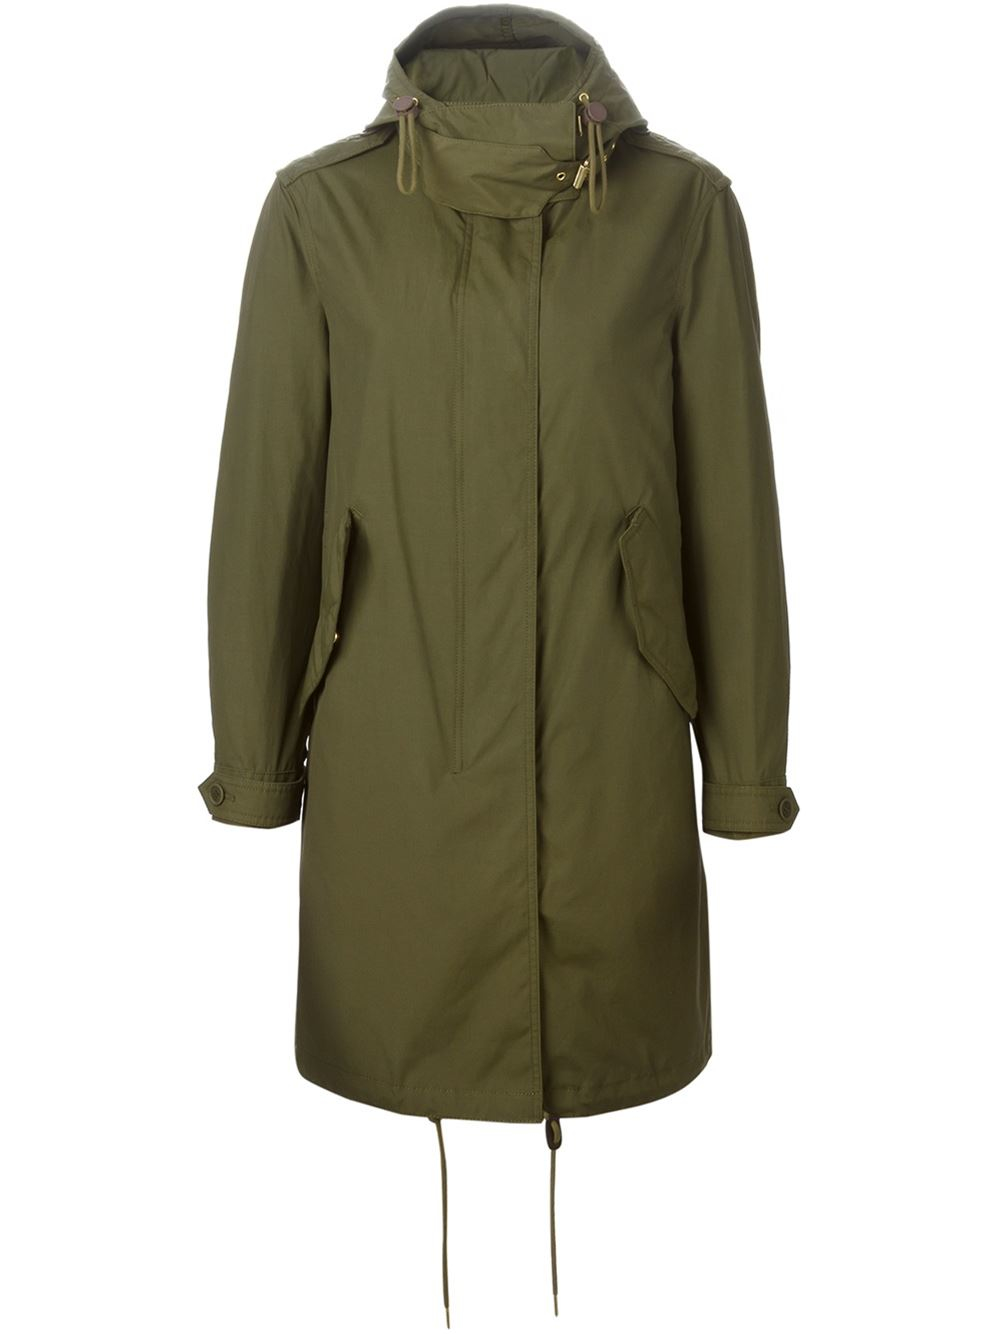 Burberry Brit 'Thaxmead' Parka Jacket in Green | Lyst